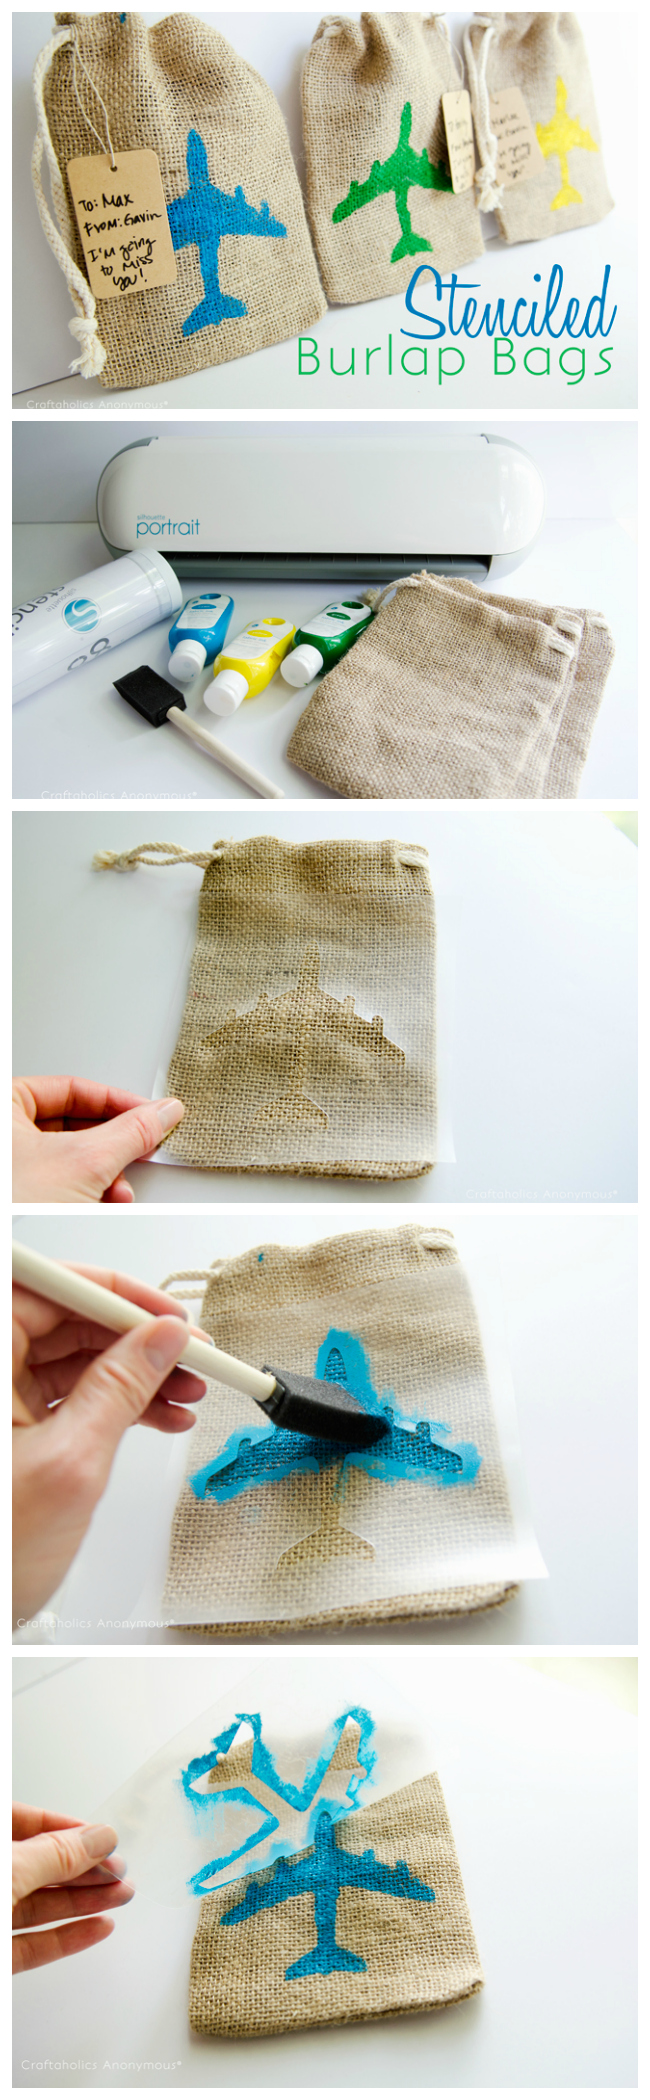 DIY stenciled burlap bags. How cute would these be for a party or baby shower?! 